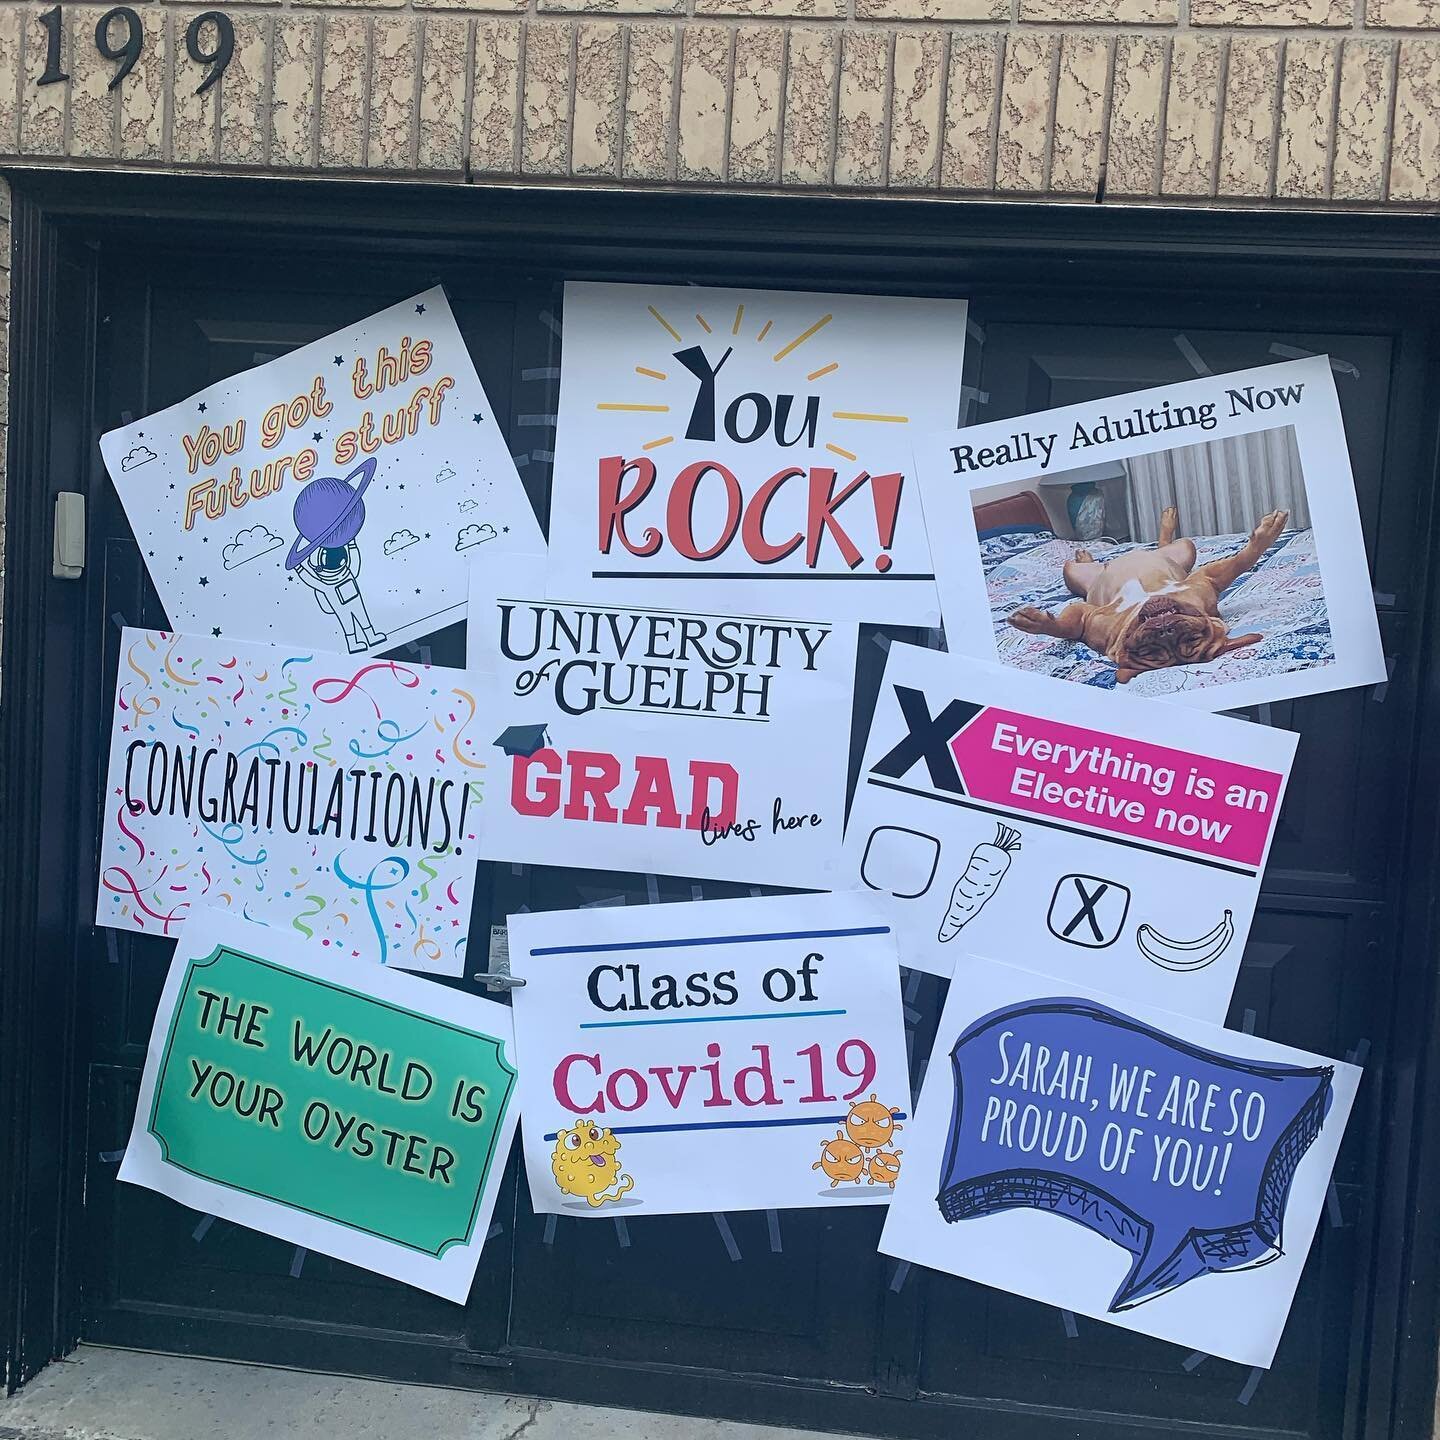 Many of our kids have had to forgo proms, grads and commencements because of Covid along with other disappointments. I was excited to put our incredible KM1 variable inkjet press to work to print off these 23 x 29 posters and plaster them all over ou